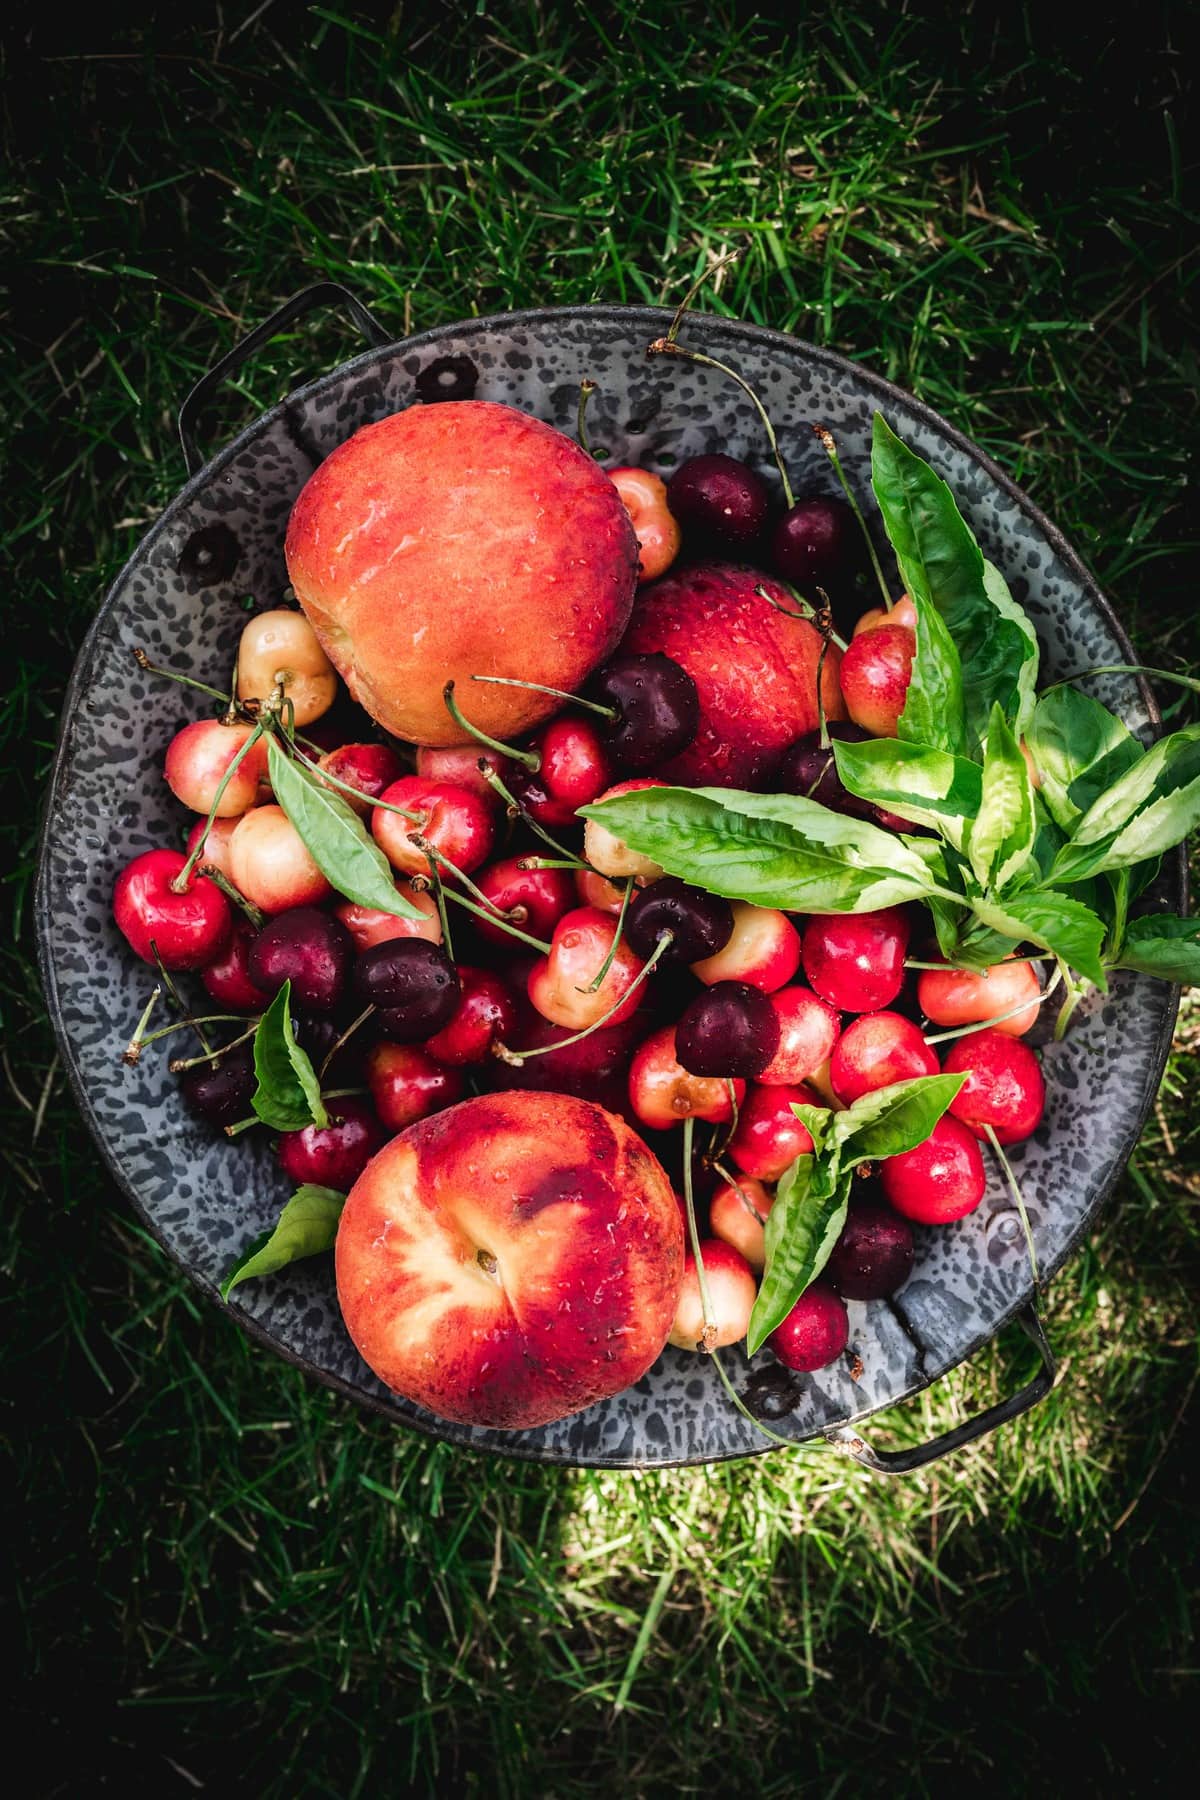 Overhead view of peaches, cherries and basil in bowl on grass